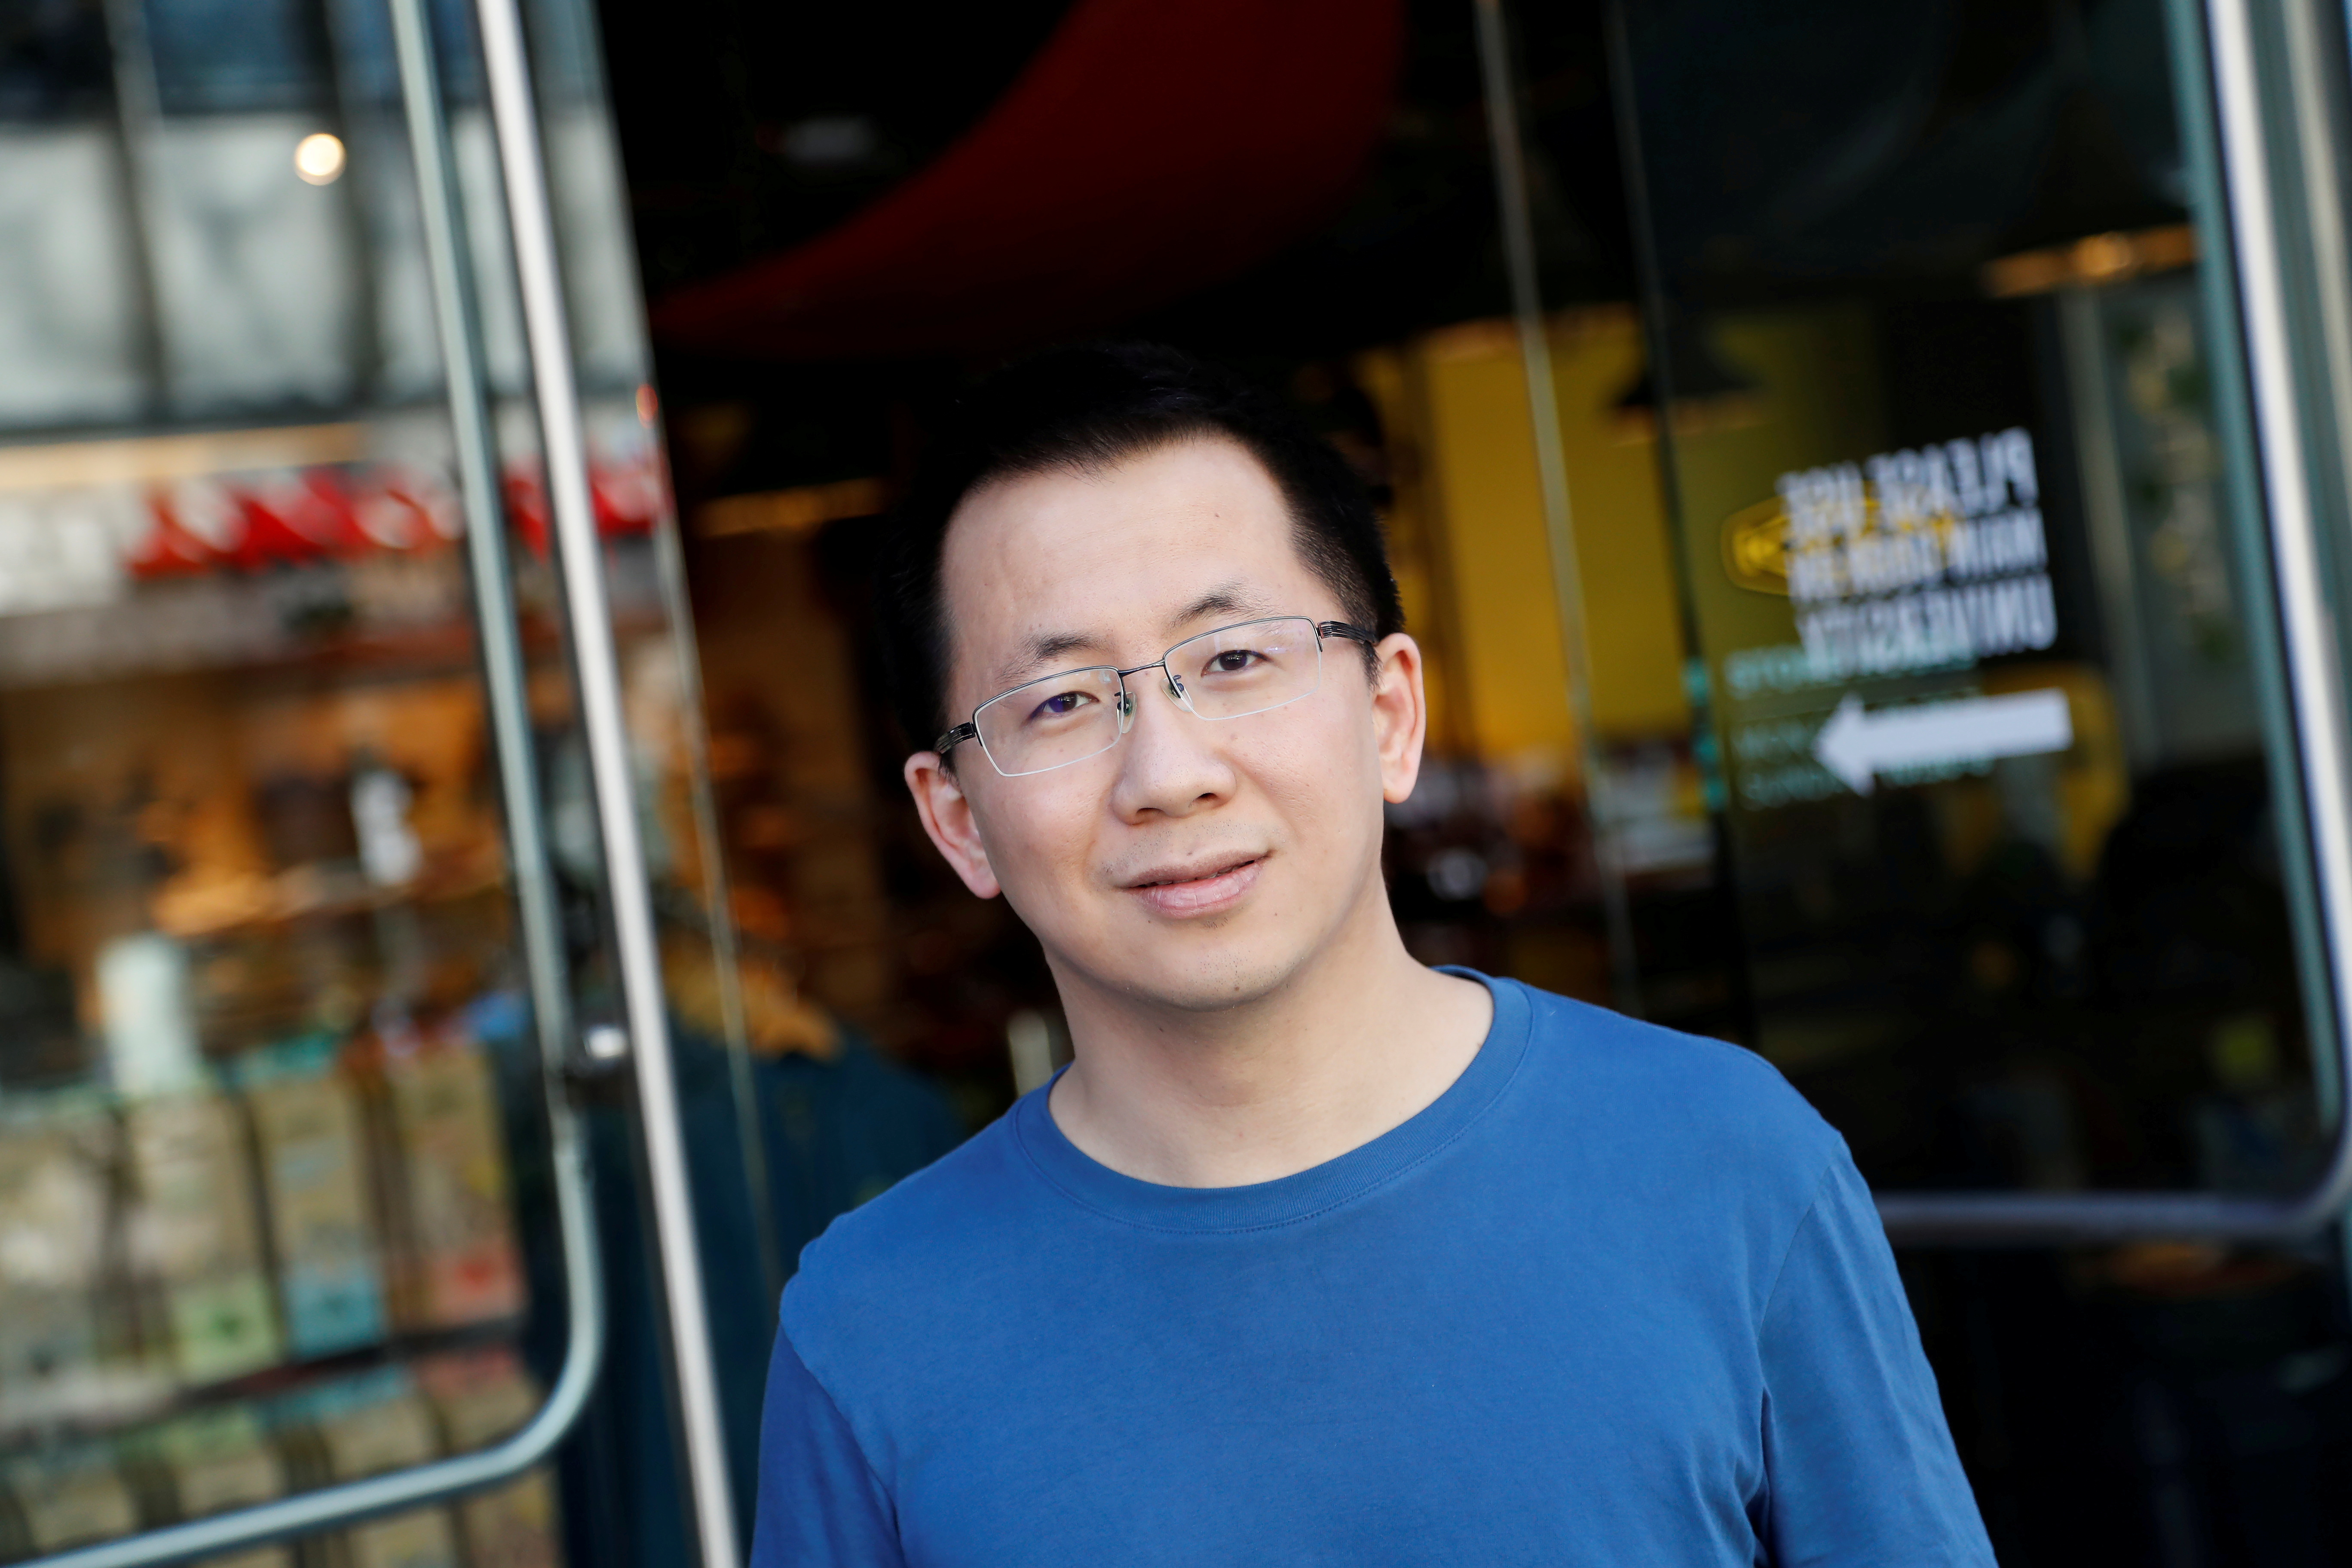 Zhang Yiming, founder and global CEO of ByteDance, poses in Palo Alto, California, U.S., March 4, 2020. REUTERS/Shannon Stapleton